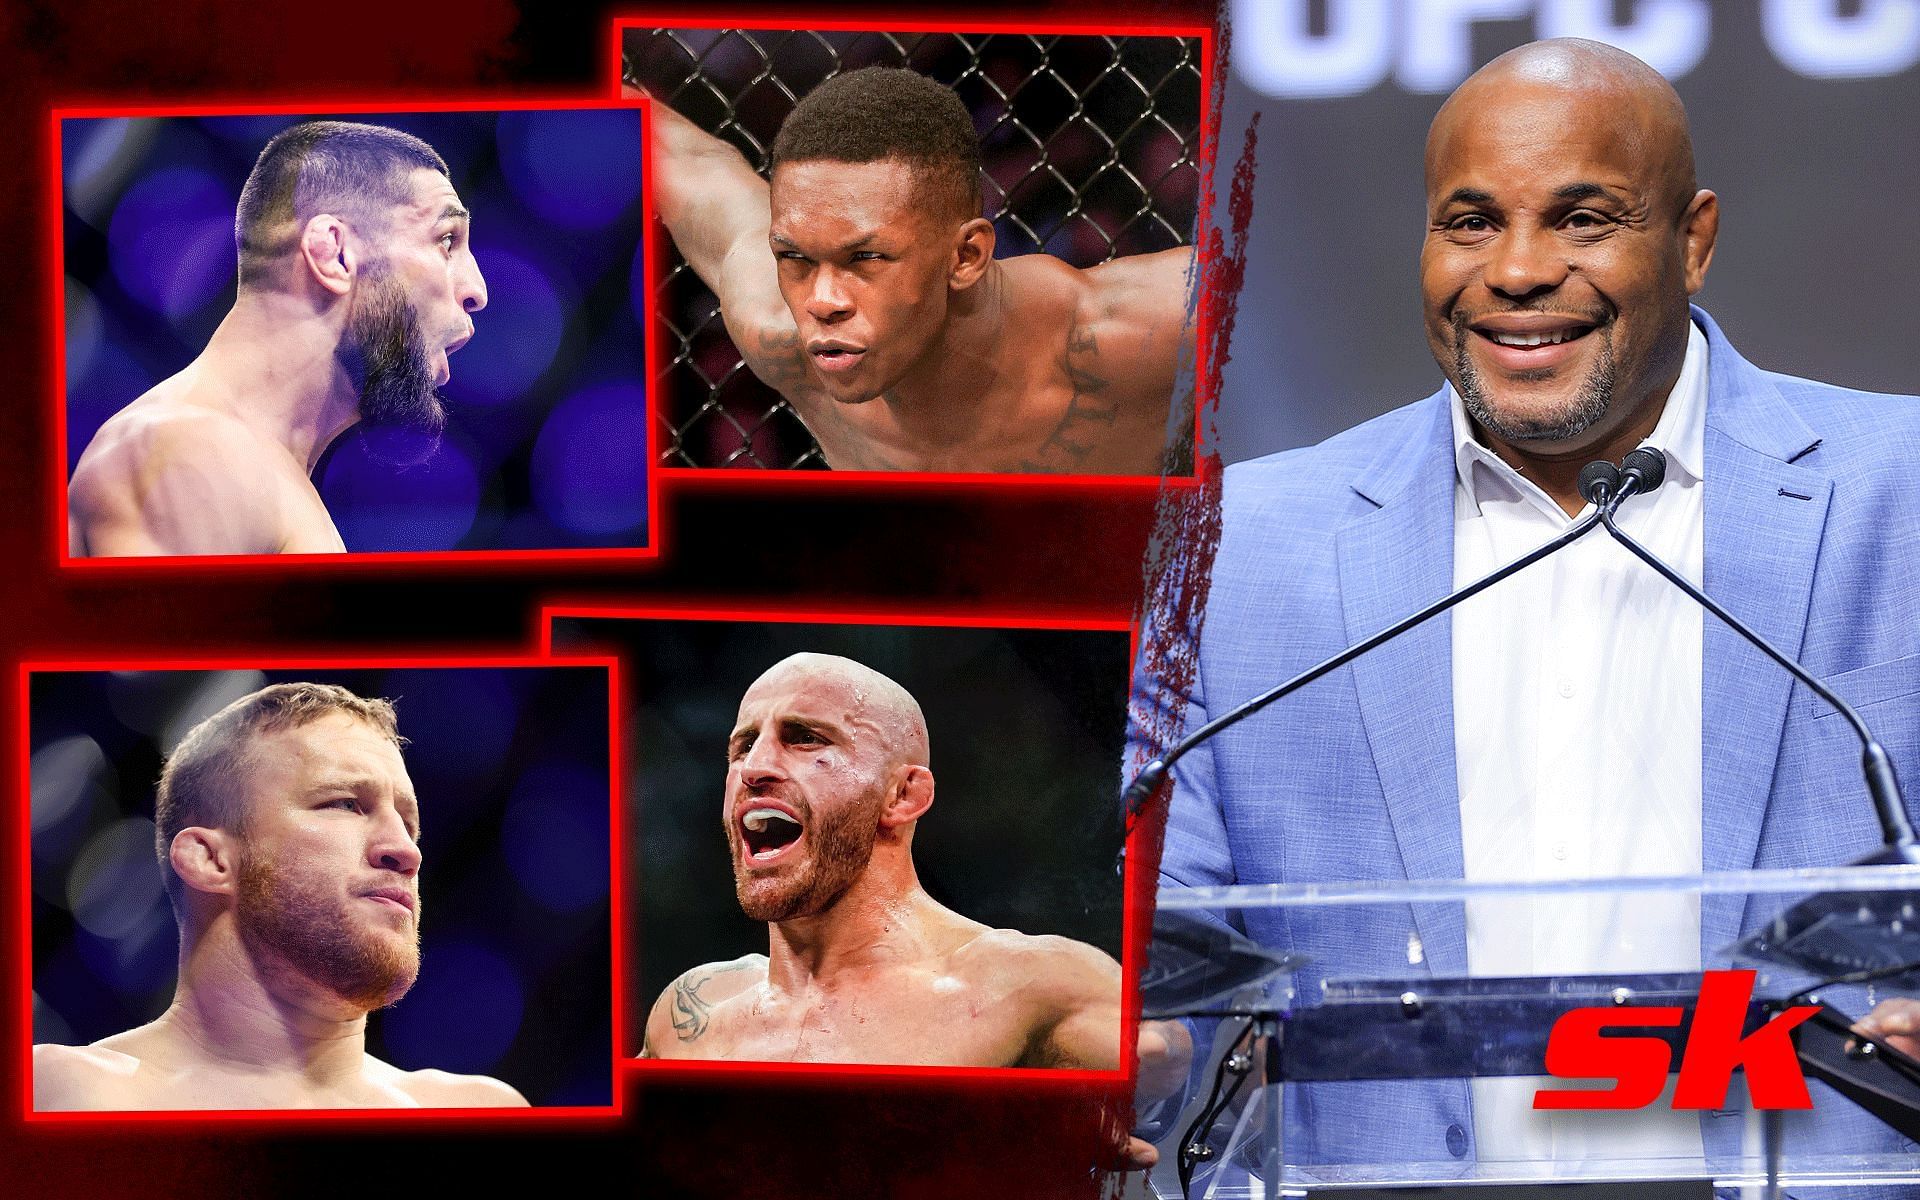 Khamzat Chimaev (top left), Israel Adesanya (top right), Justin Gaethje (bottom left), Alexander Vokanovski (bottom right) and Daniel Cormier (right). [Images courtesy: all images from Getty Images]